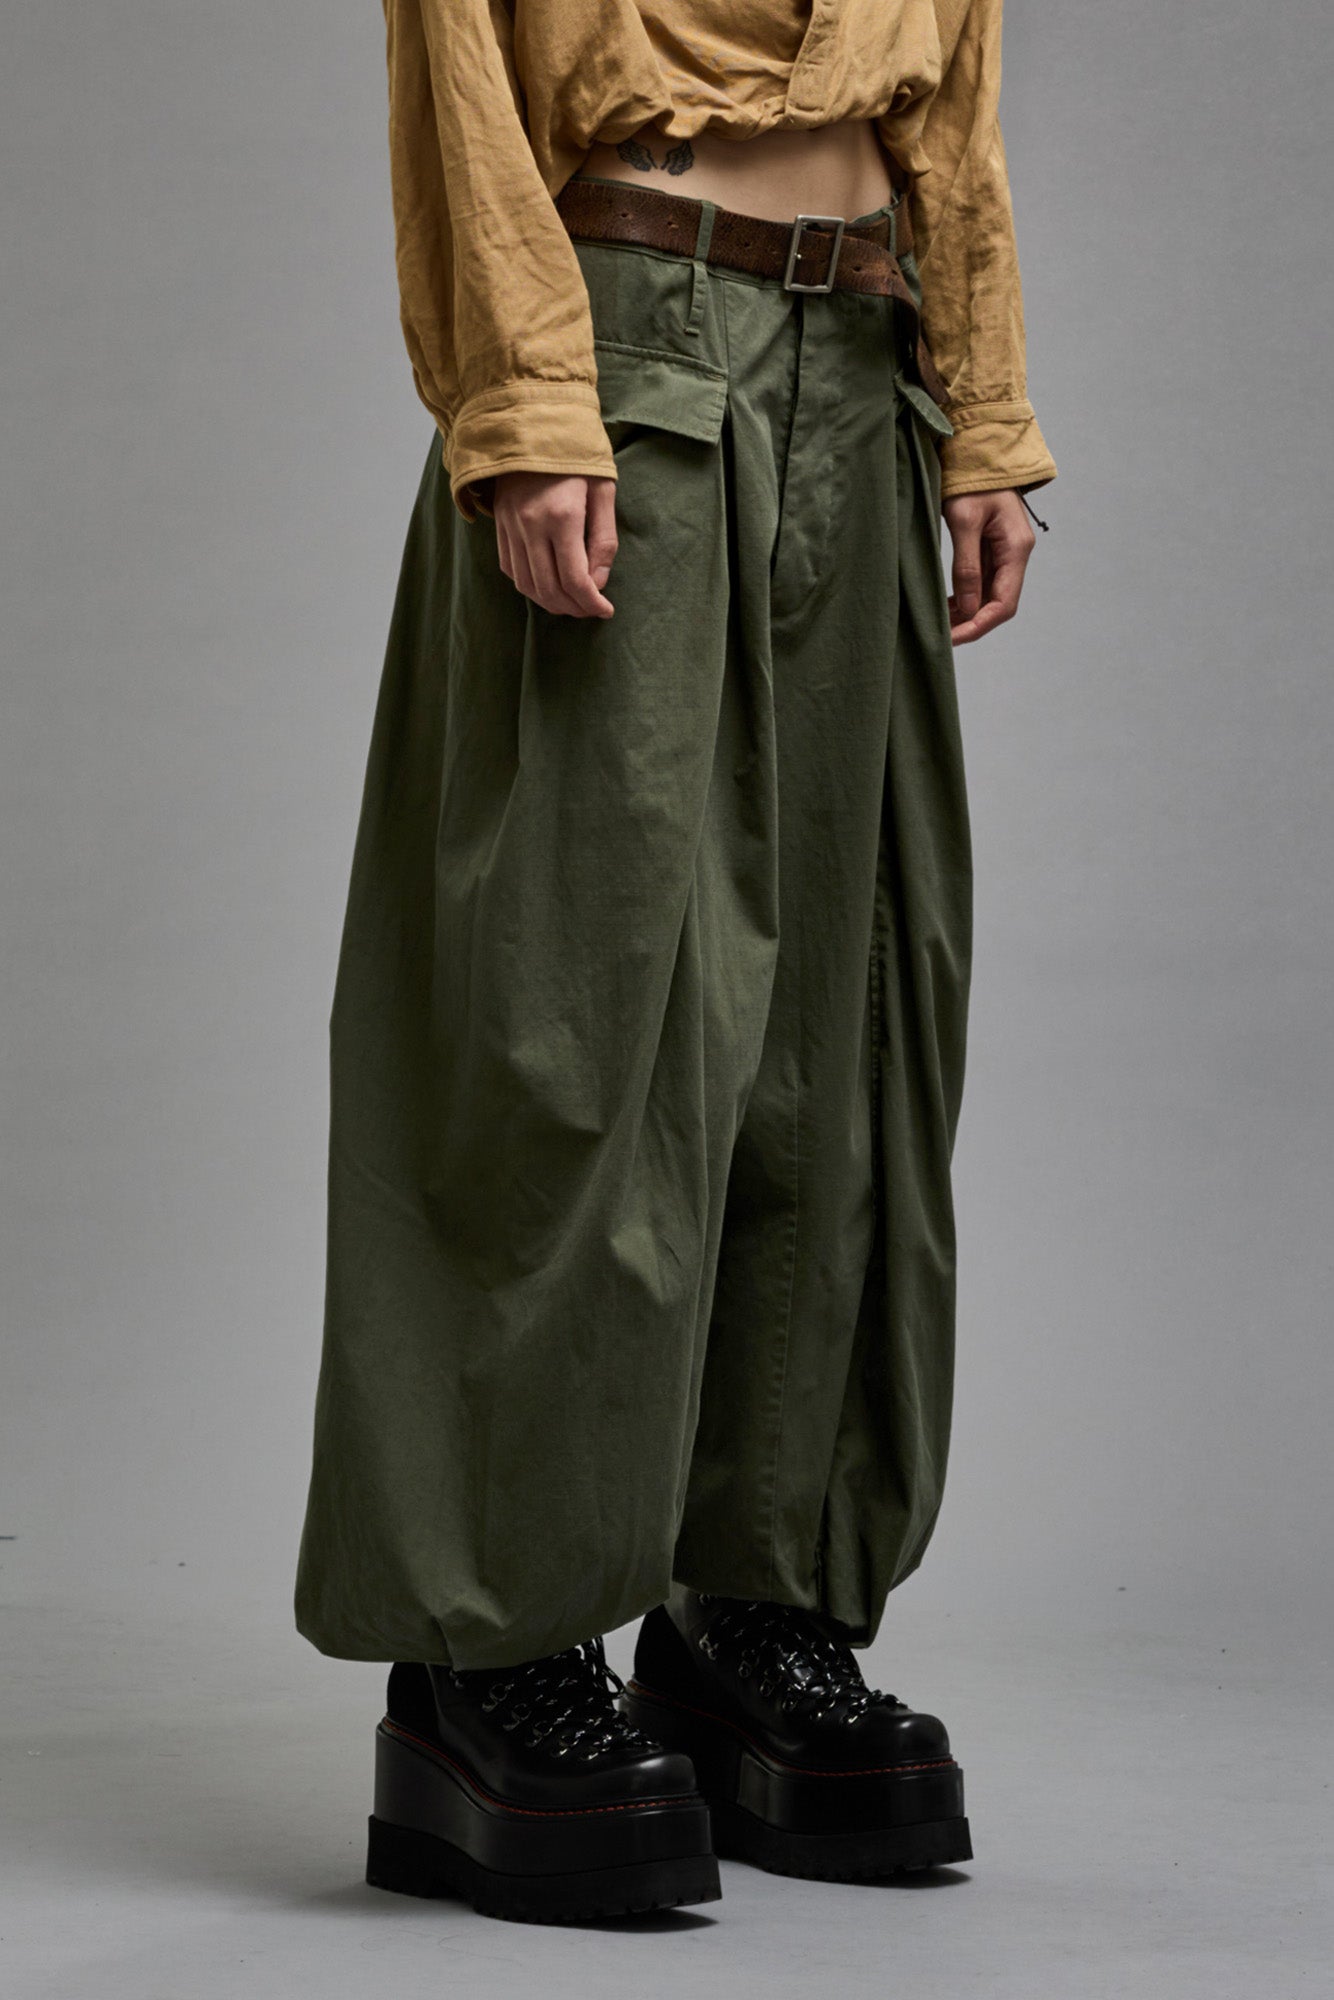 JESSE ARMY PANT - OLIVE RIPSTOP